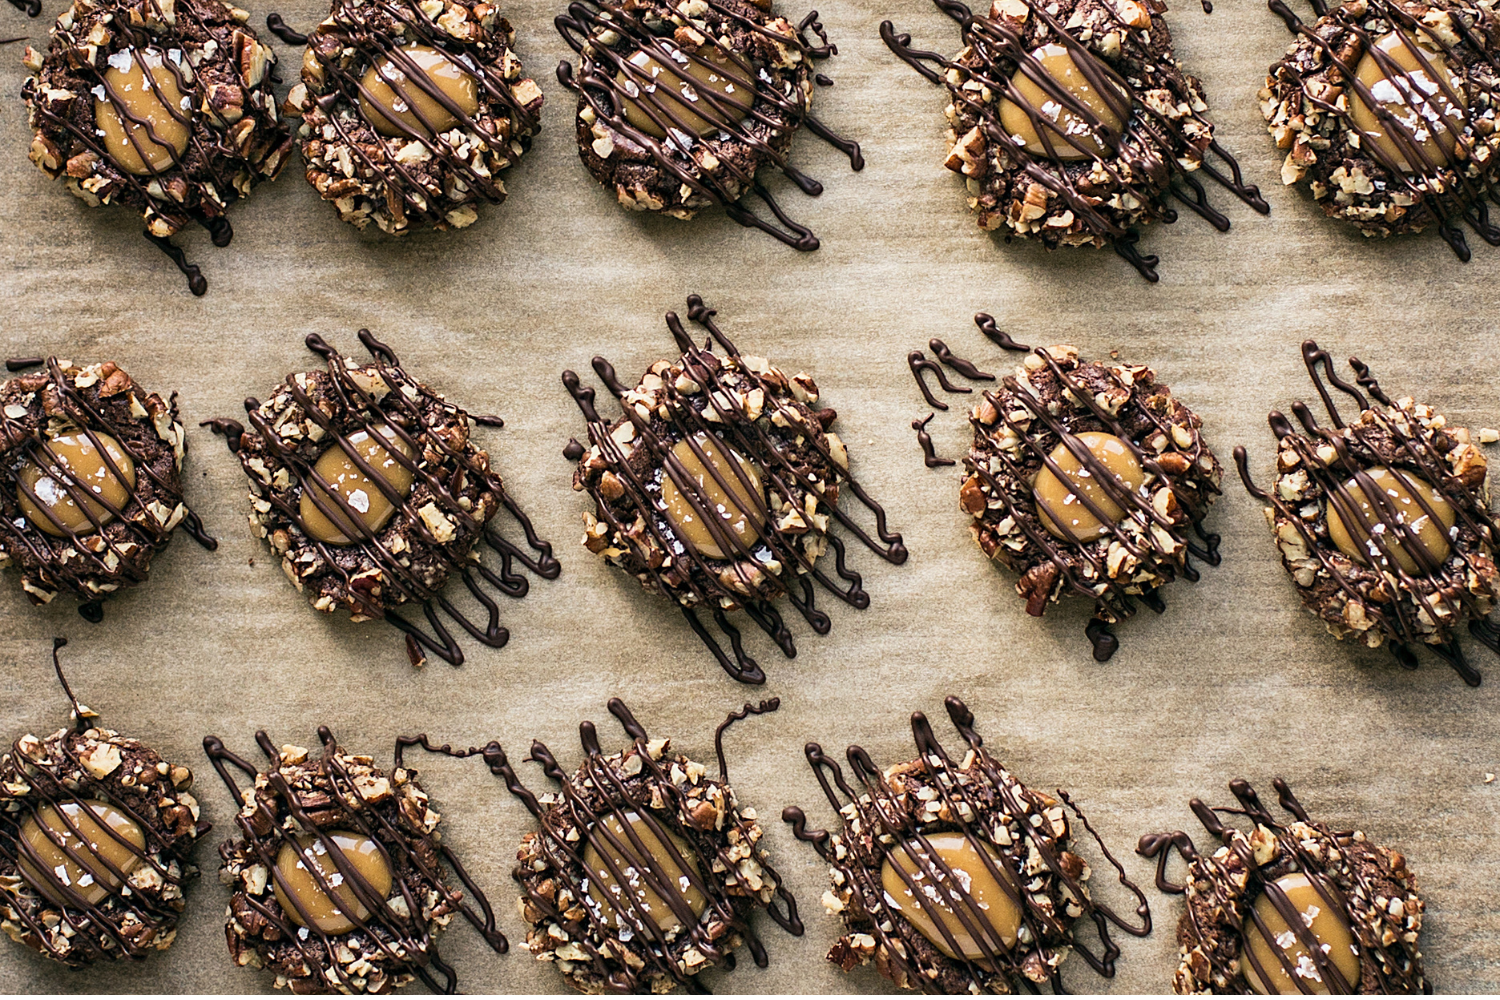 straight-on top view of many Turtle Thumbprint Cookies on a parchment paper-lined baking tray, all drizzled with chocolate.